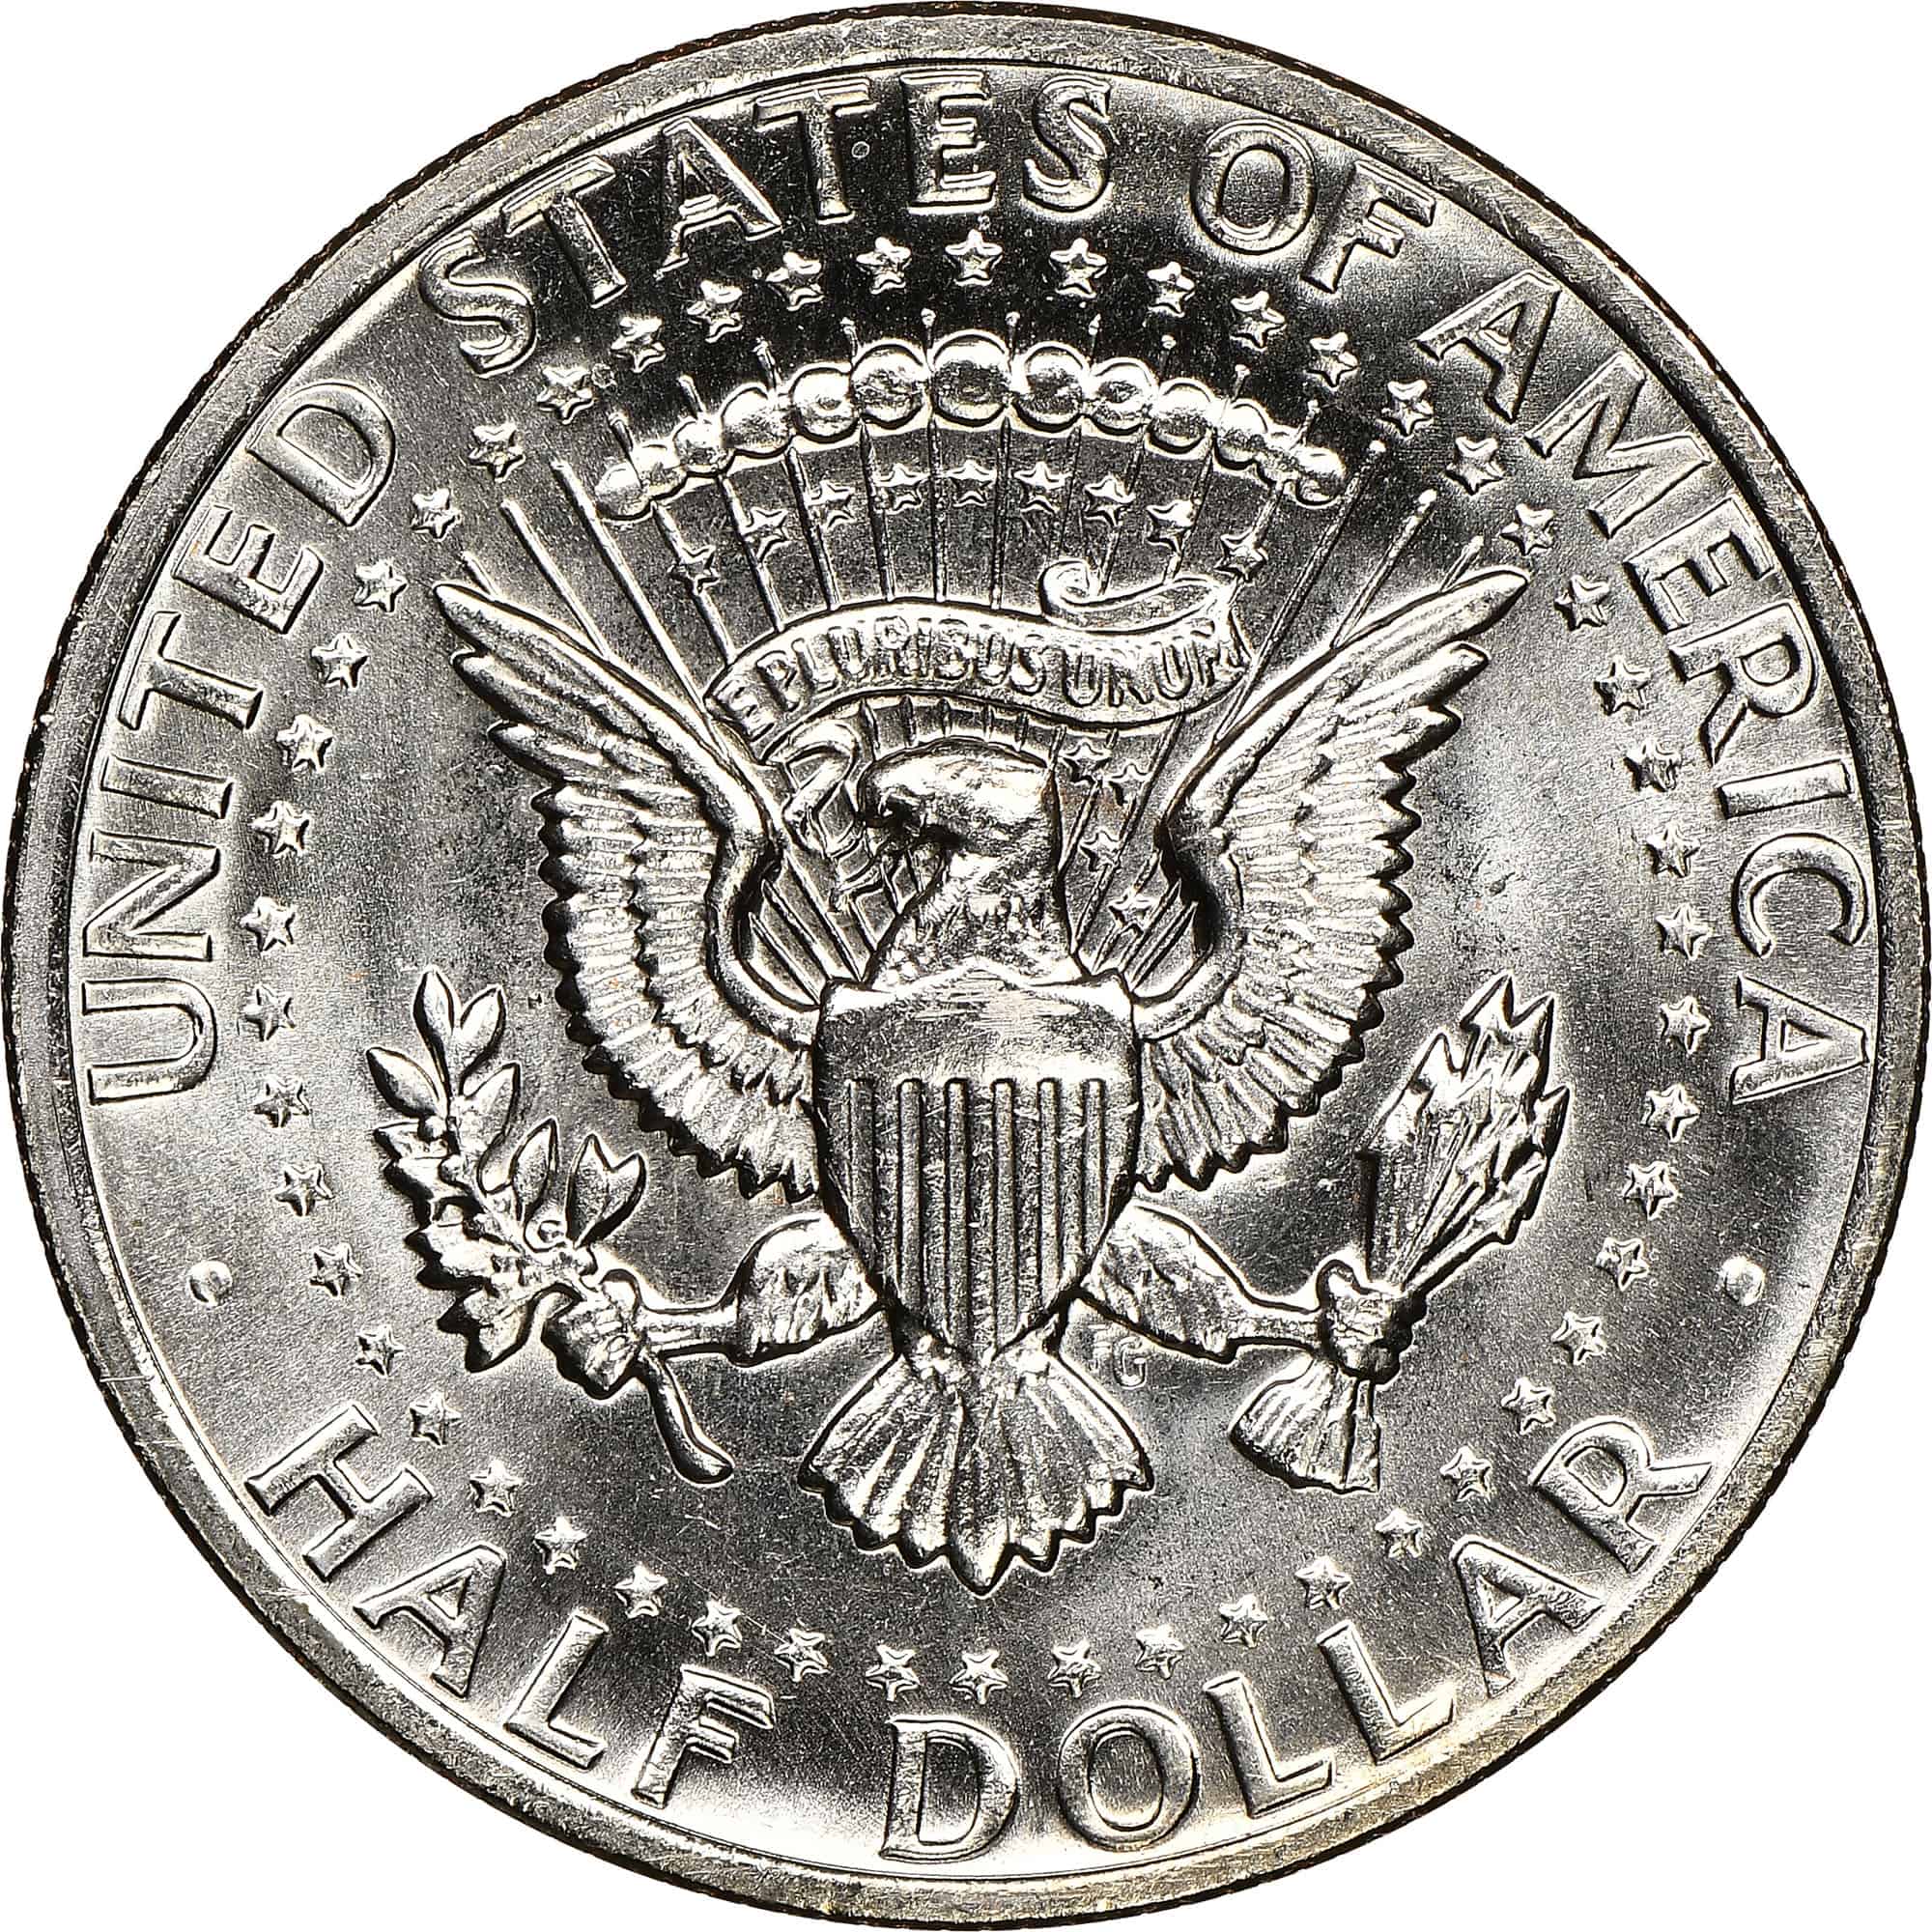 The Reverse of the 1973 Half Dollar